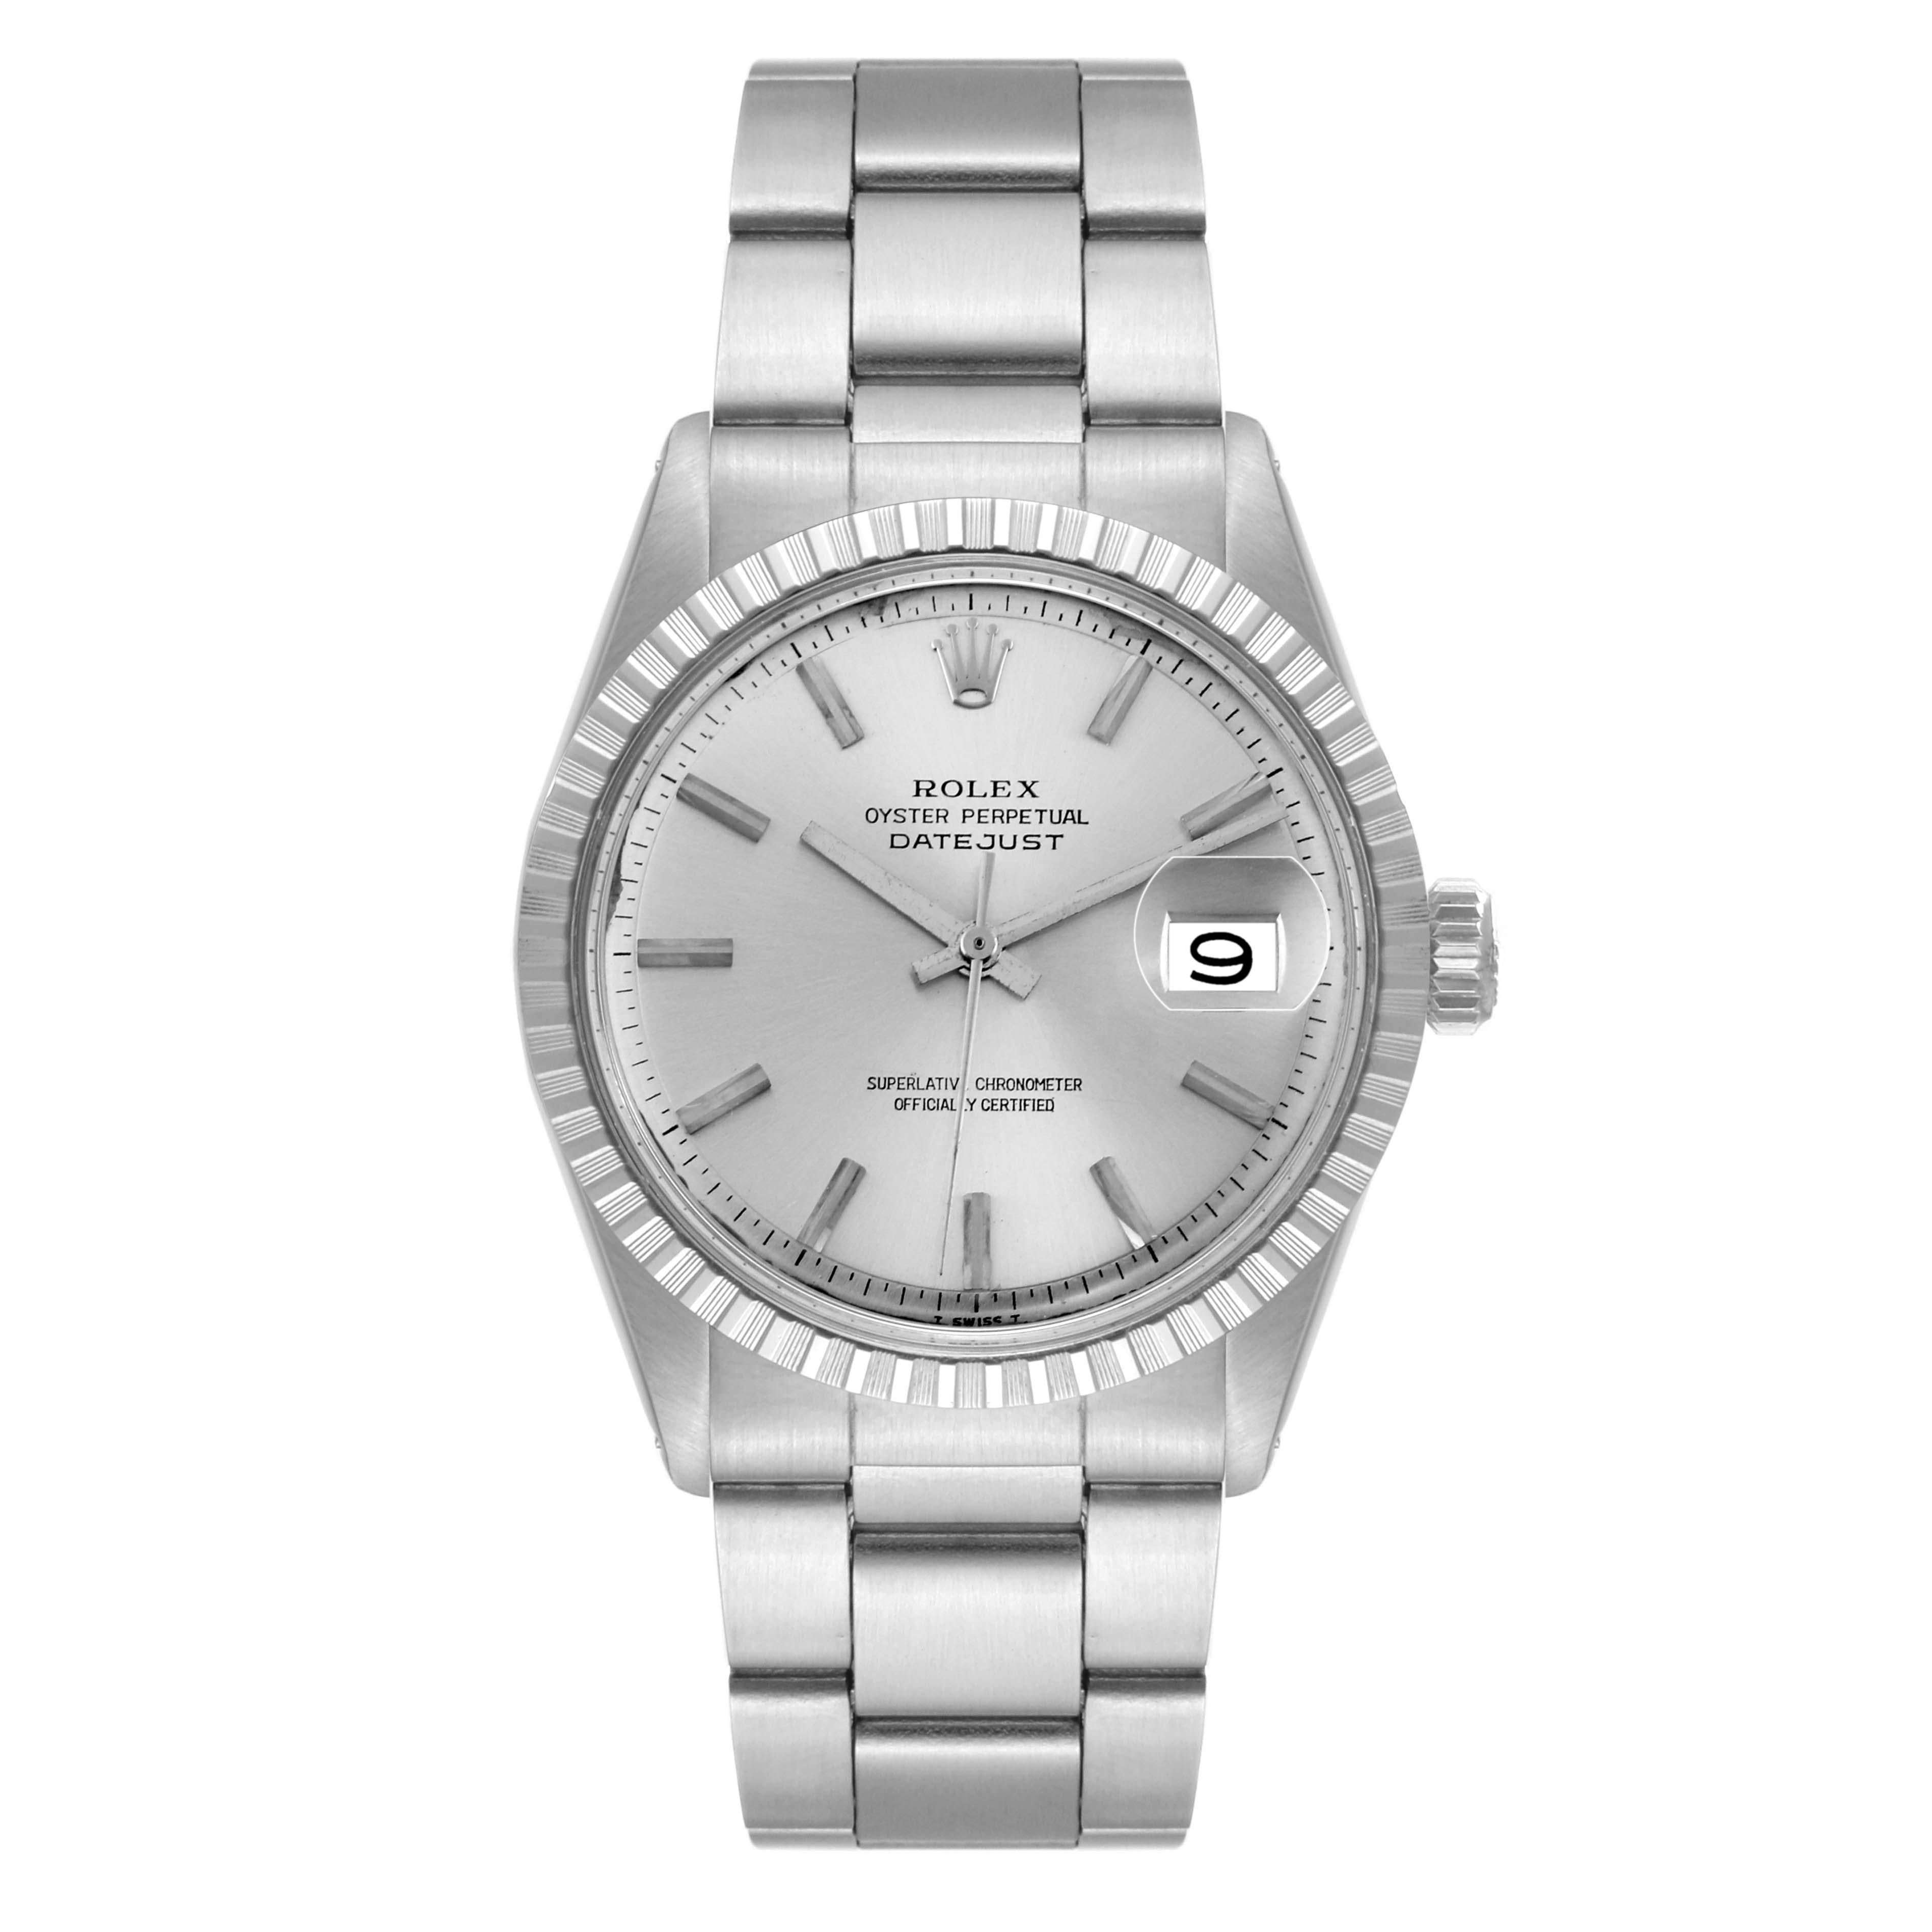 Rolex Datejust Steel Engine Turned Bezel Silver Dial Vintage Mens Watch 1601. Officially certified chronometer automatic self-winding movement. Stainless steel oyster case 36 mm in diameter. Rolex logo on the crown. Stainless steel engine turned